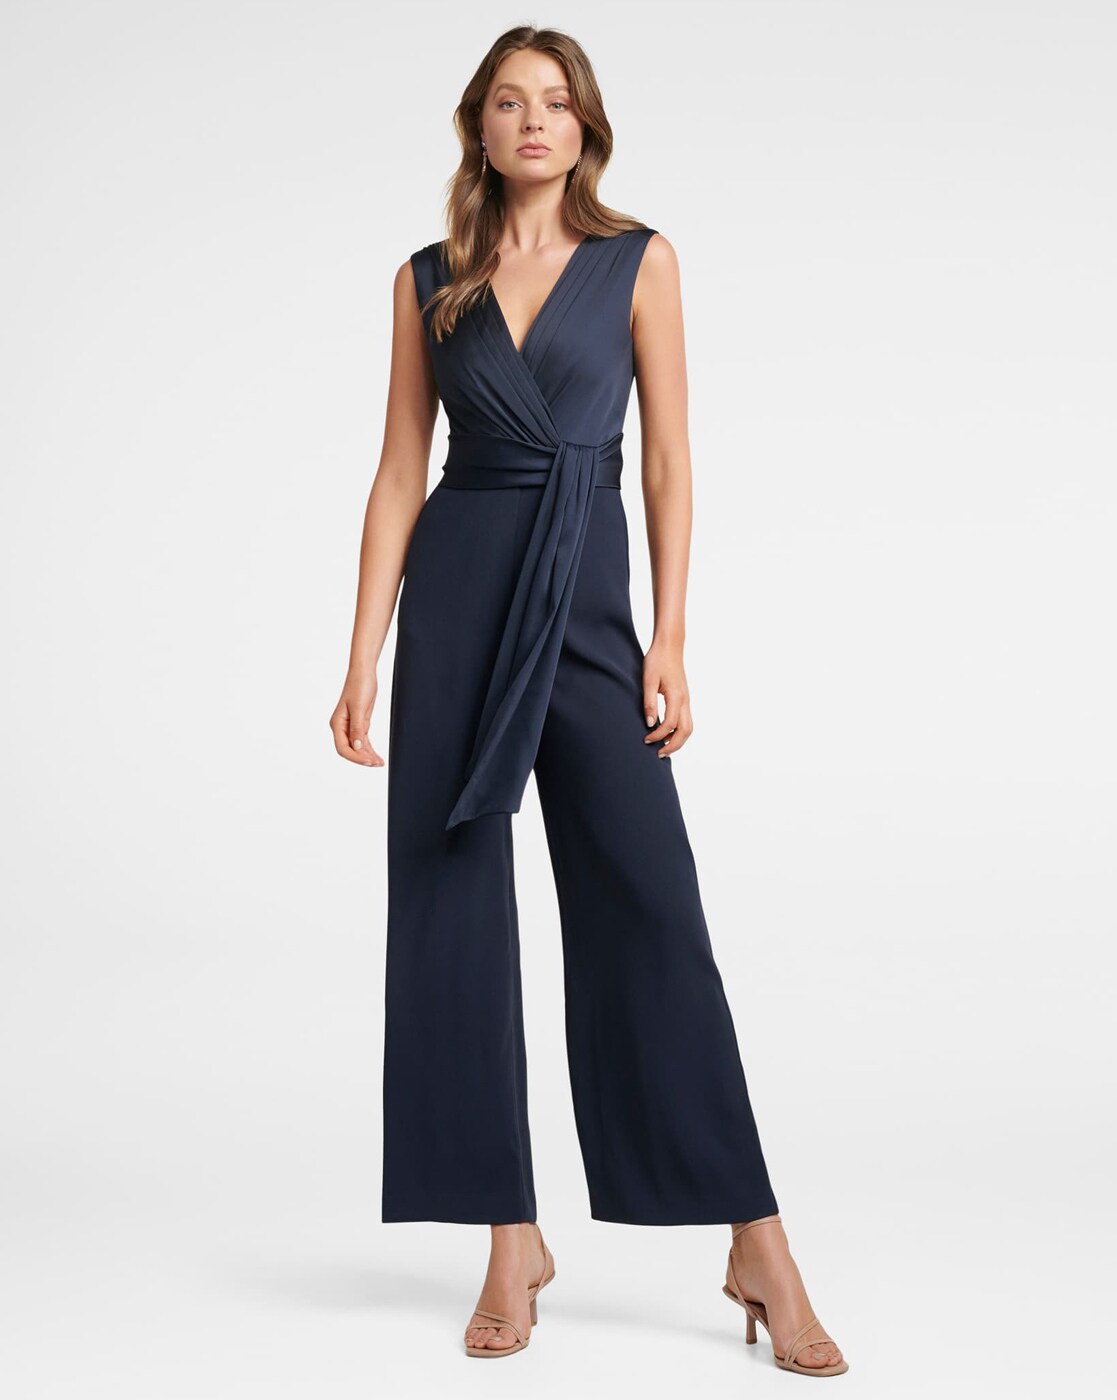 Top 10 Navy Blue Jumpsuit for Wedding Guests & Bridesmaids